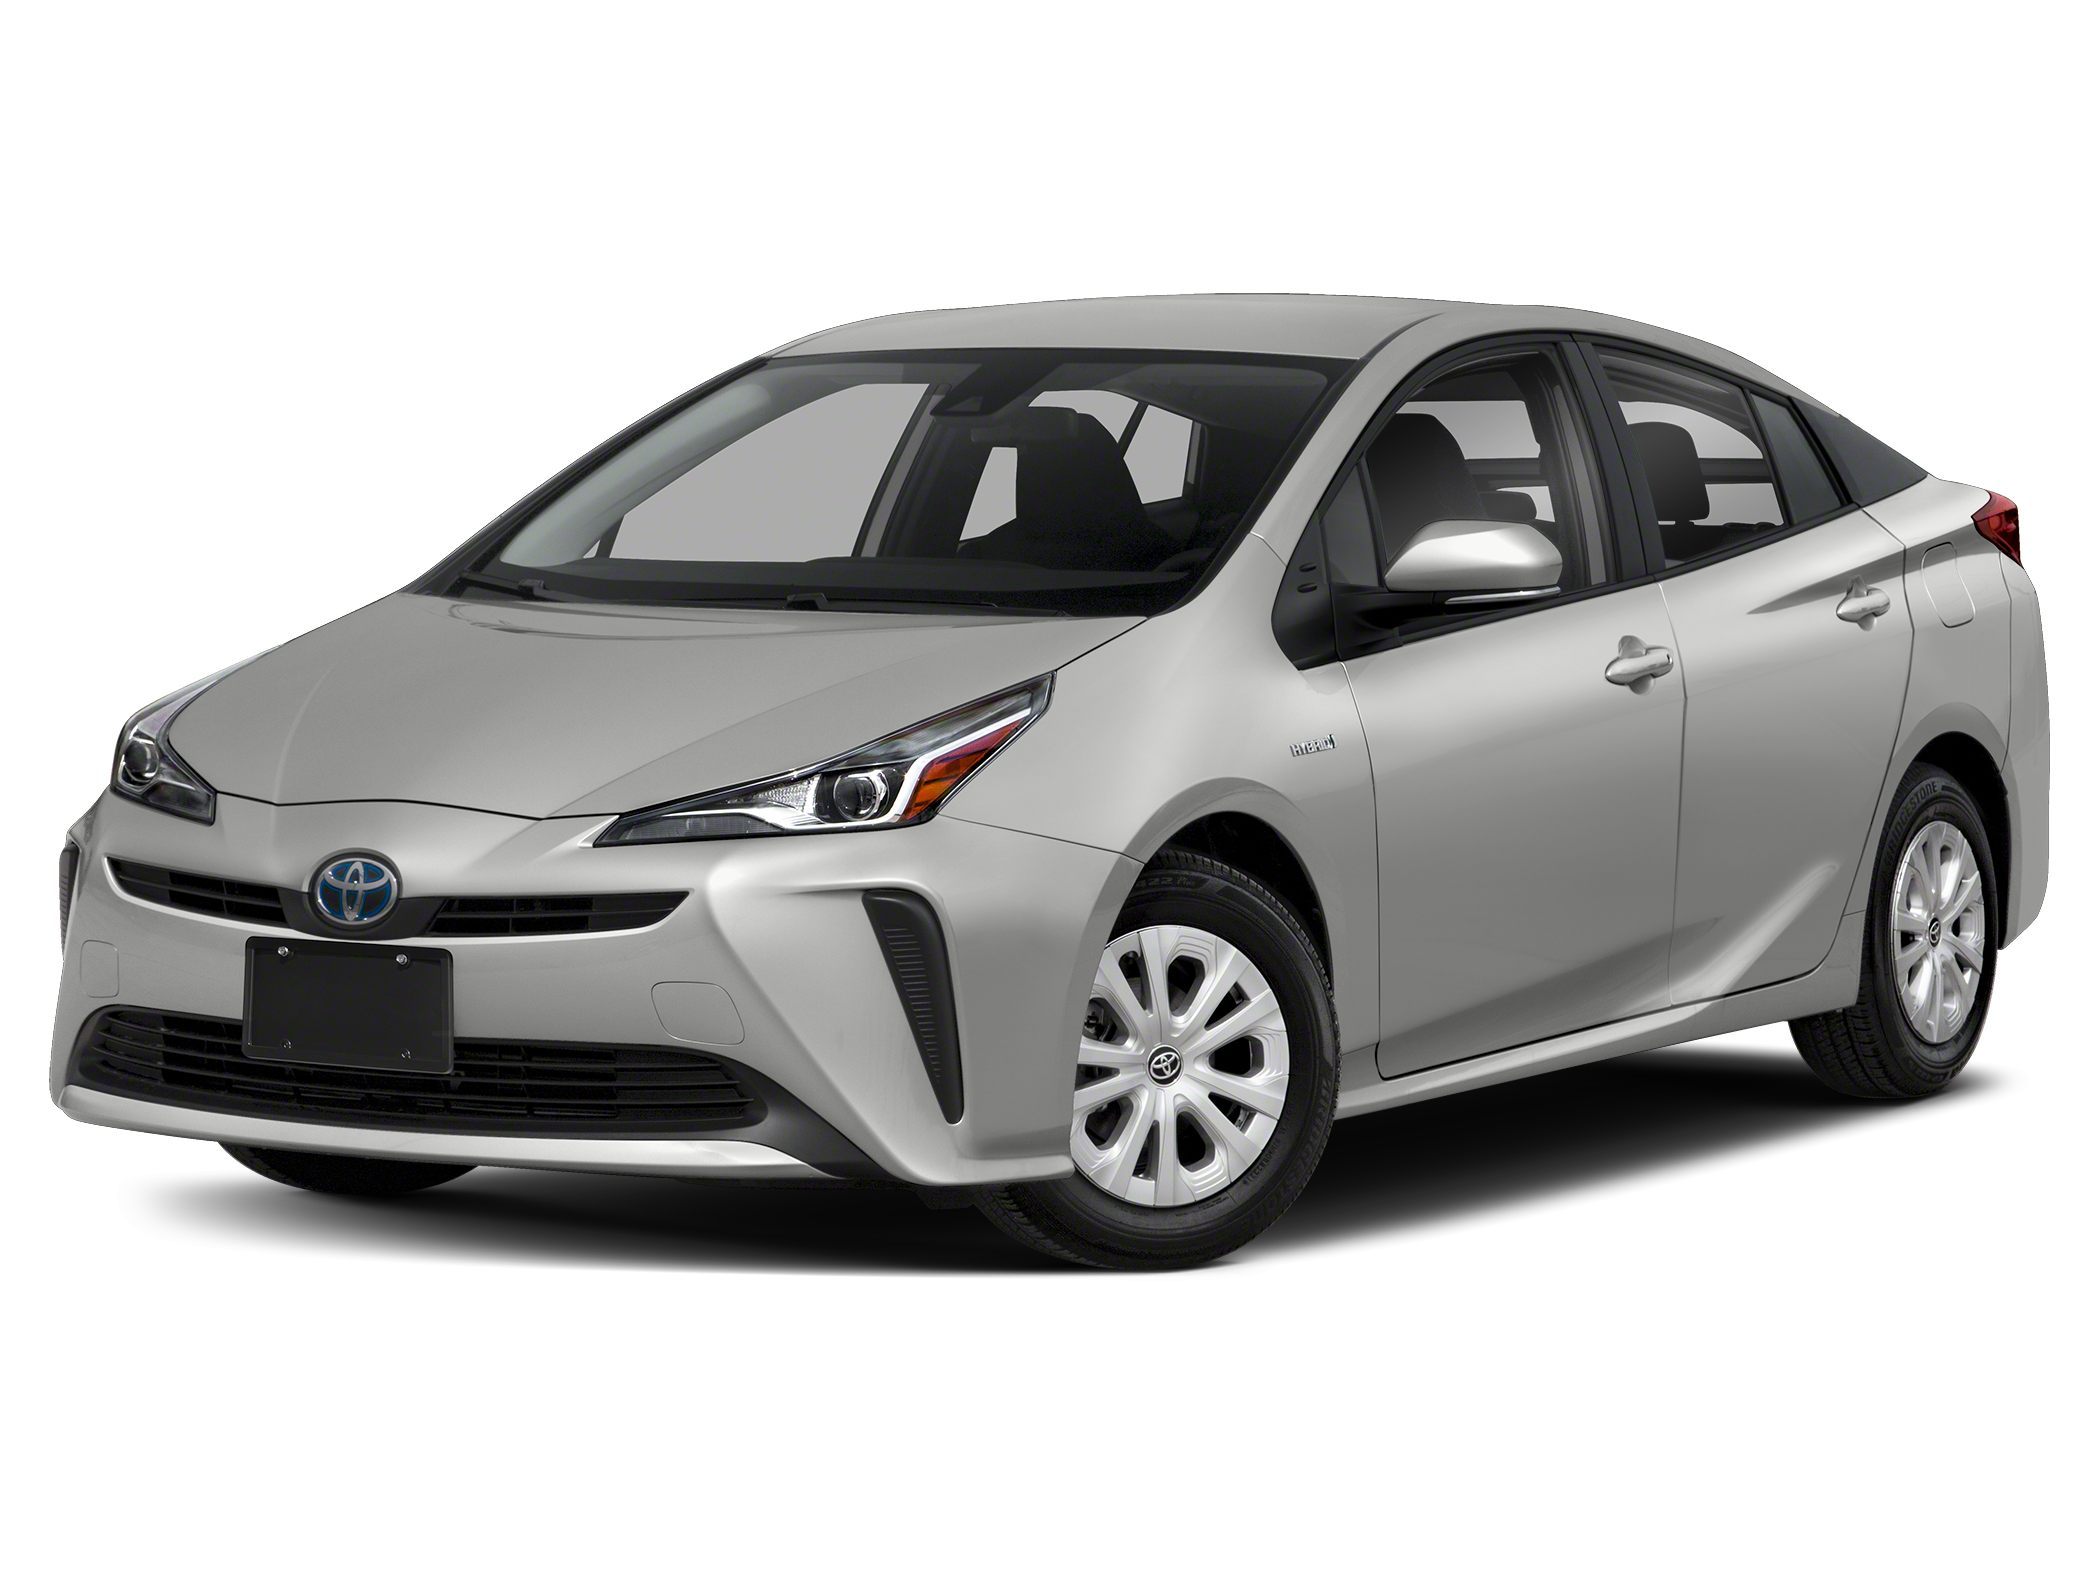 New 2022 Toyota Prius For Sale In Clearwater, Fl | Clearwater Toyota